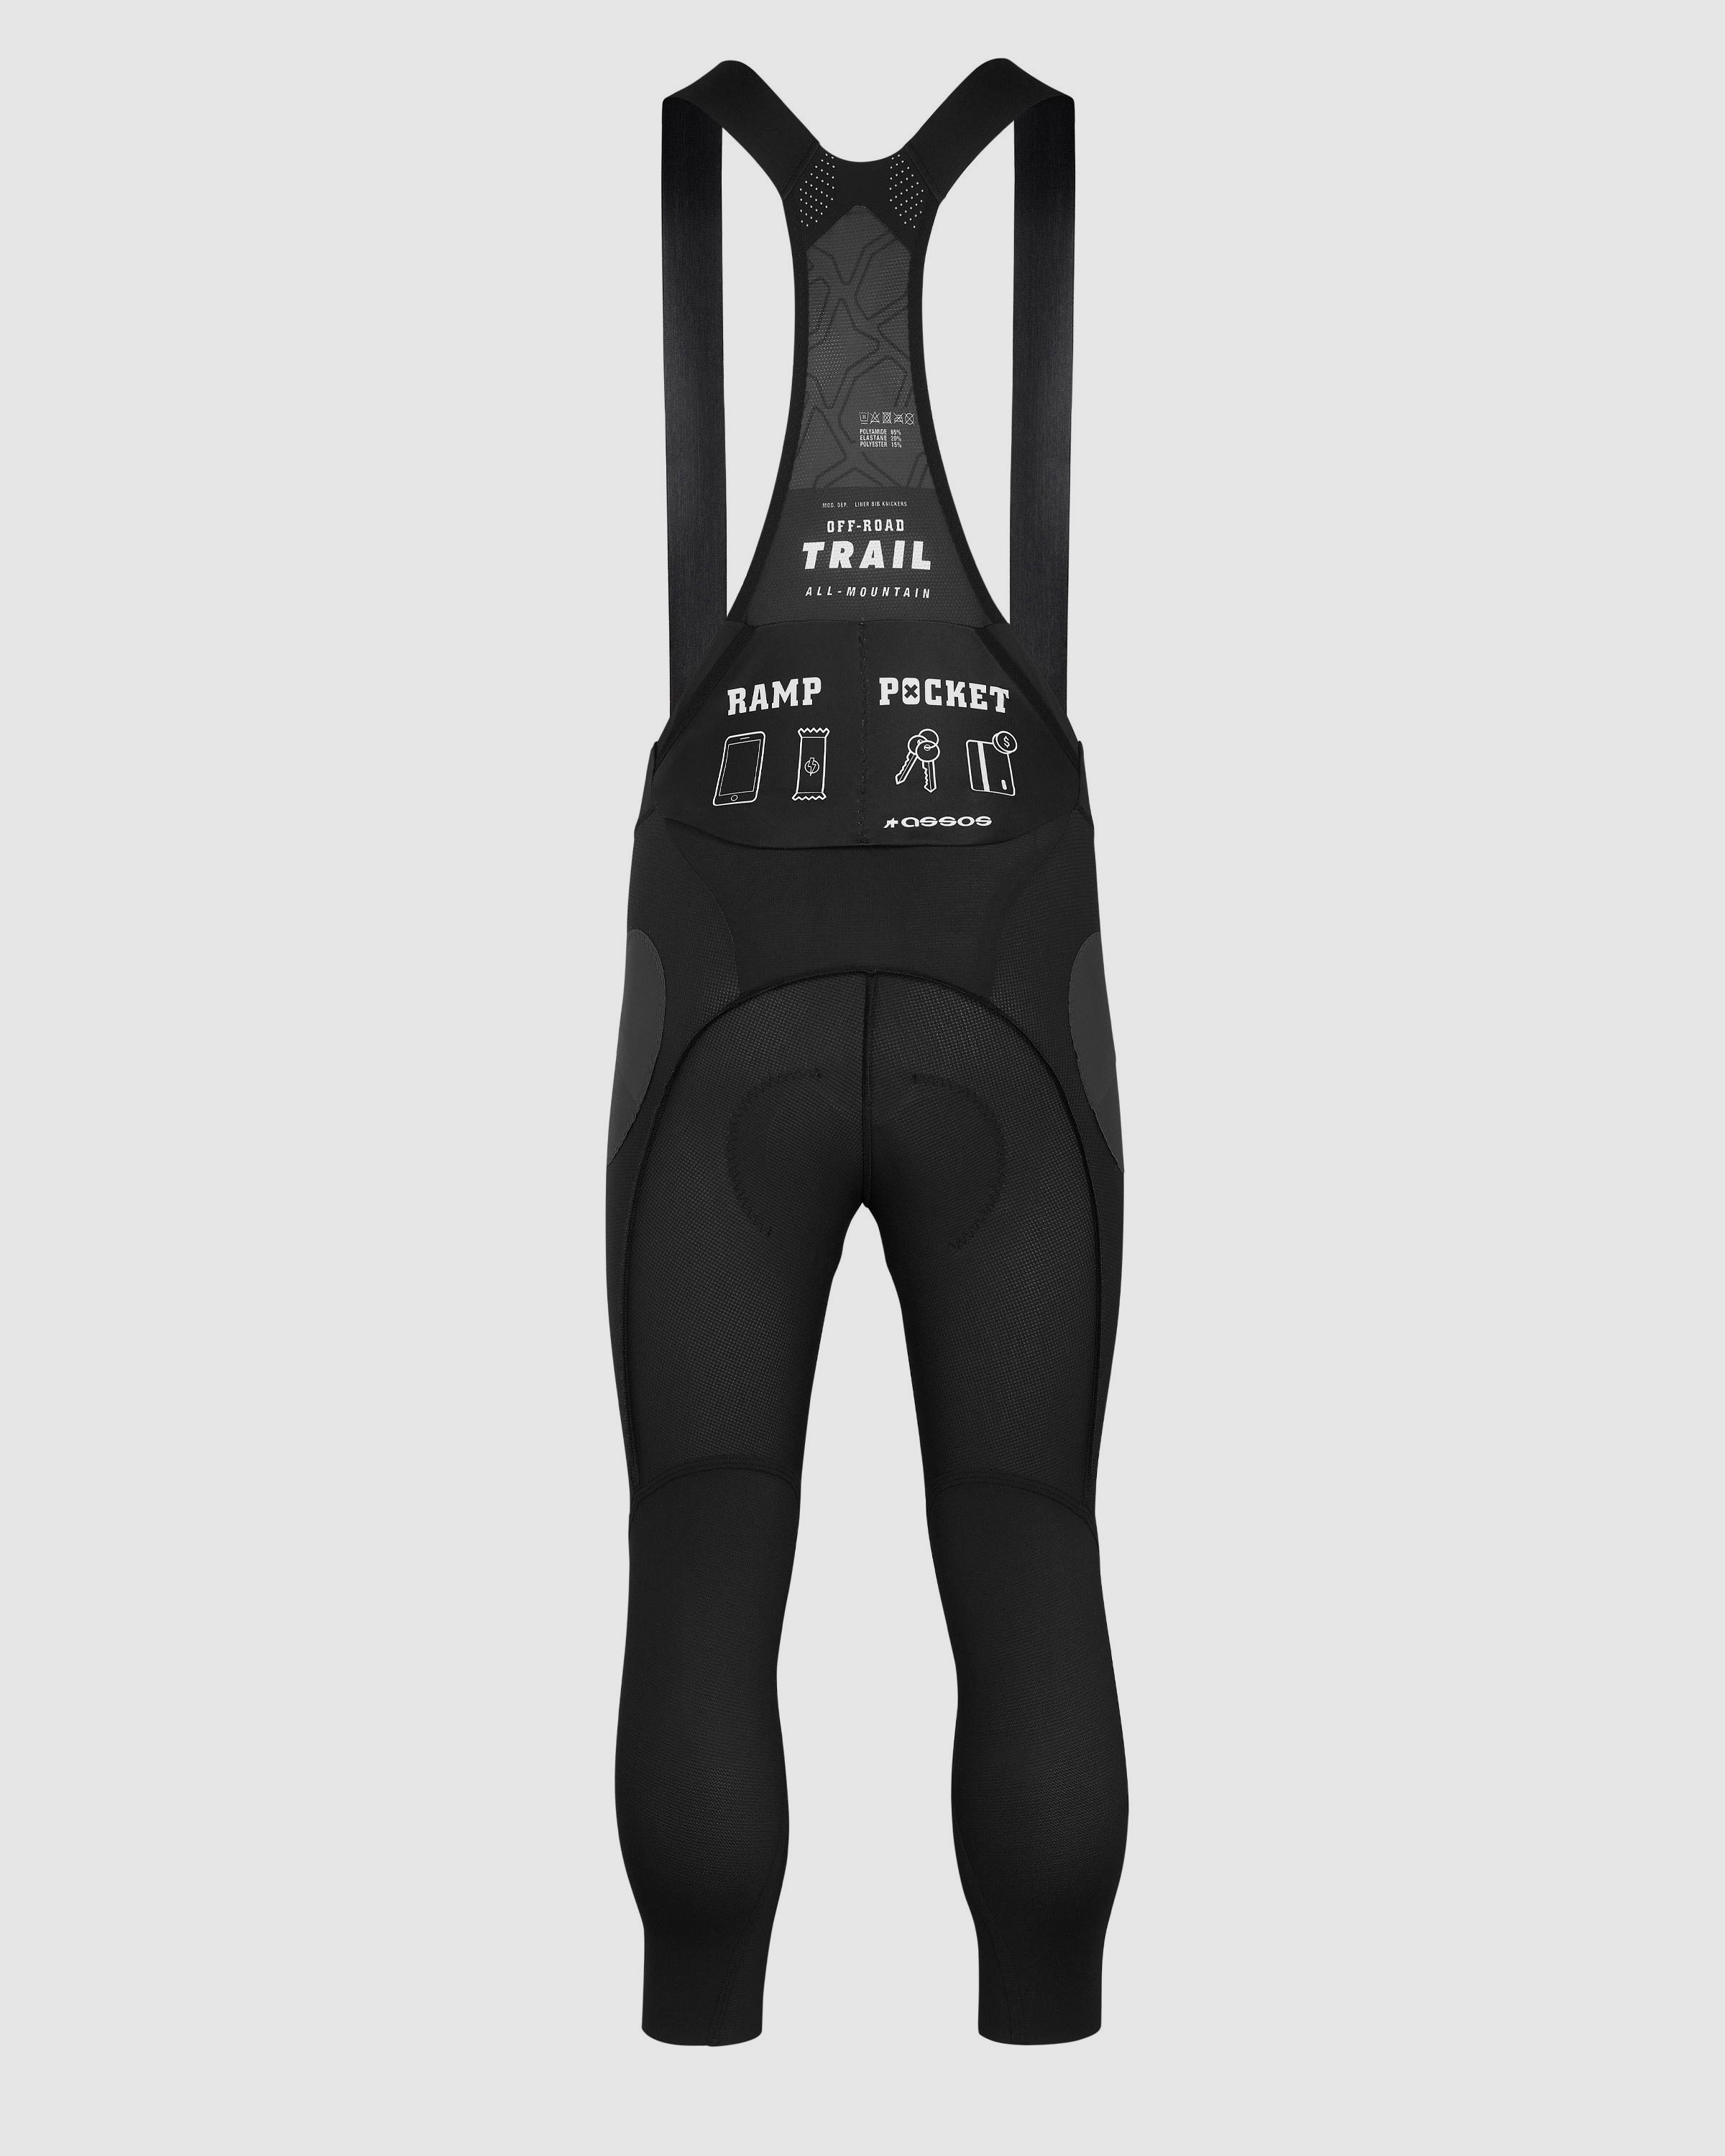 TRAIL Liner Bib Knickers - ASSOS Of Switzerland - Official Outlet